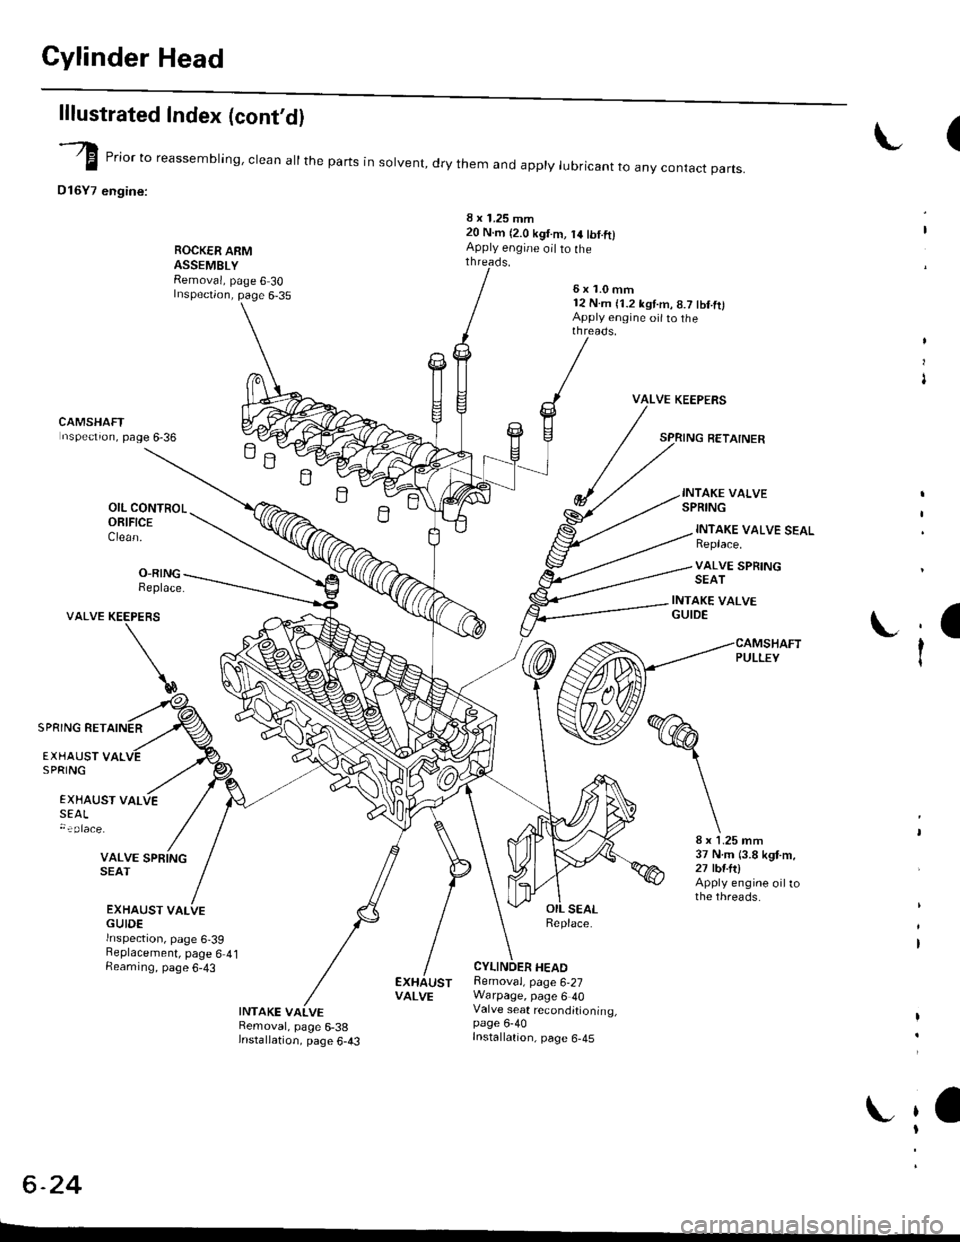 HONDA CIVIC 1997 6.G Manual PDF Cylinder Head
lllustrated Index (contdl
(-/) _.- E "or to reassembring, crean at the parts in sorvent, dry them and appry rubricant to anv contact oarts.
D16Y7 engine:
ROCK€R ARMASSEMBLYRemoval, pa